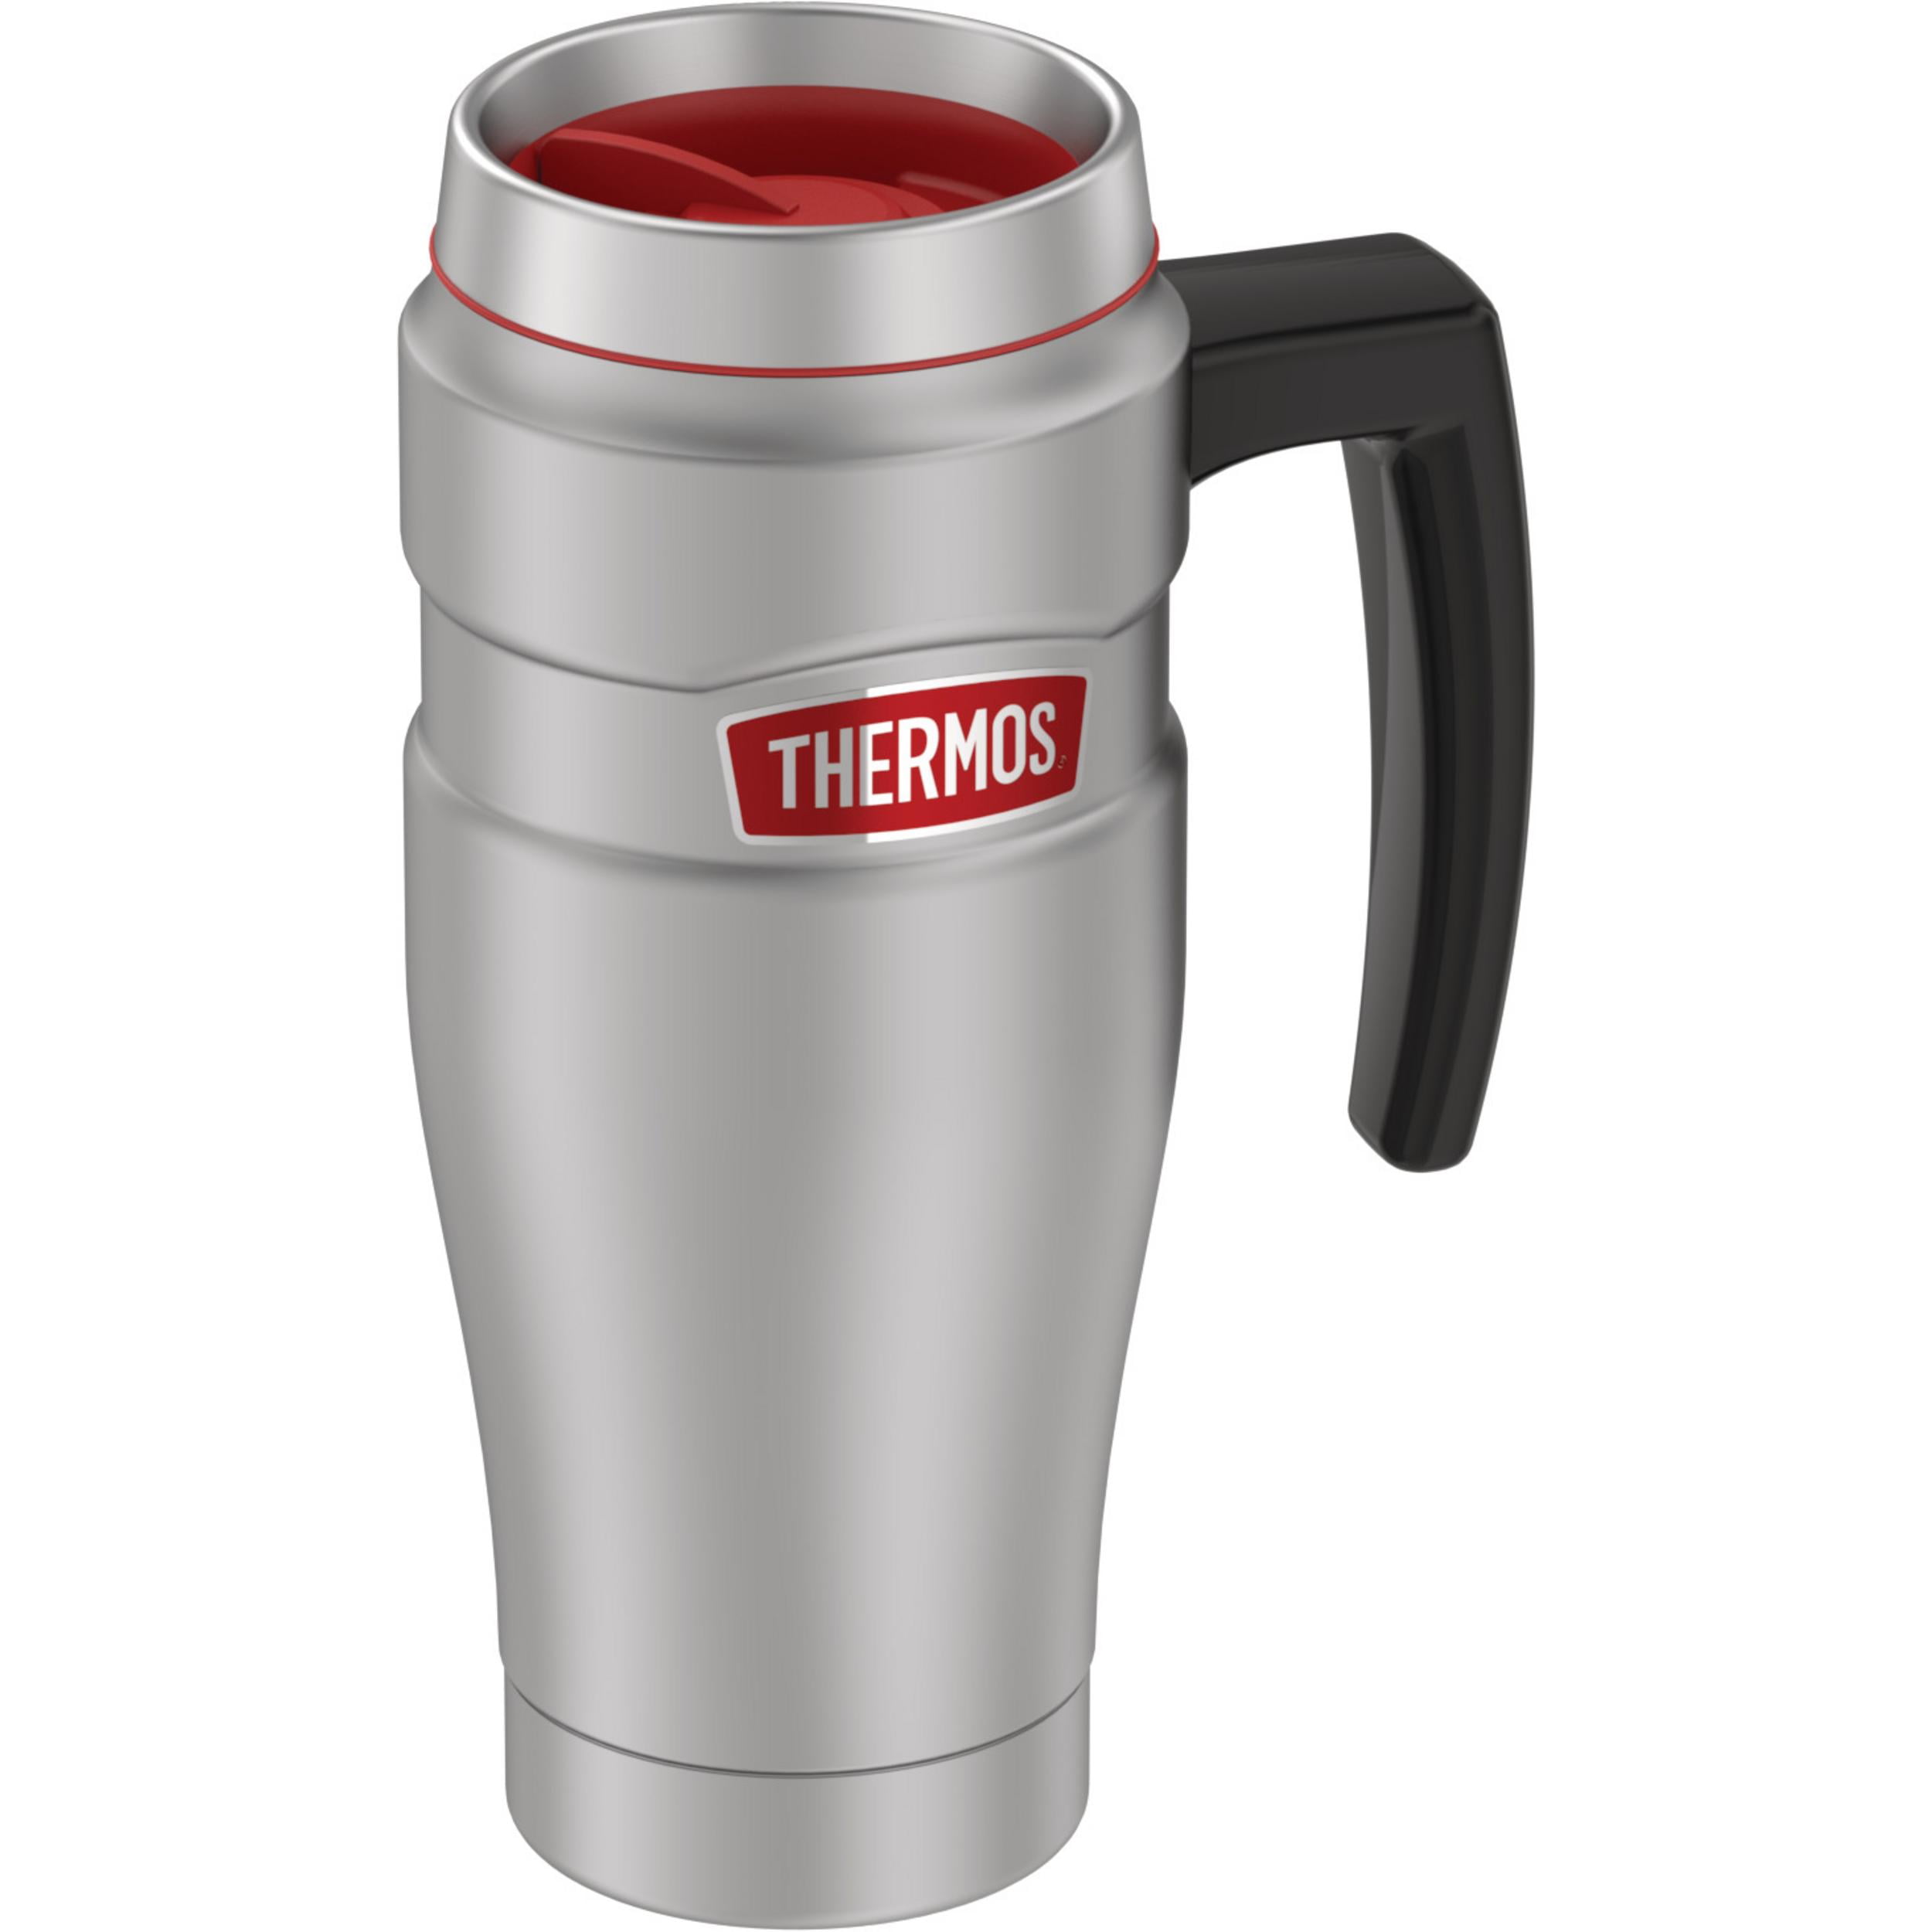 New THERMOS Stainless King S/Steel Vacuum Insulated Travel Mug 470ml with Handle 